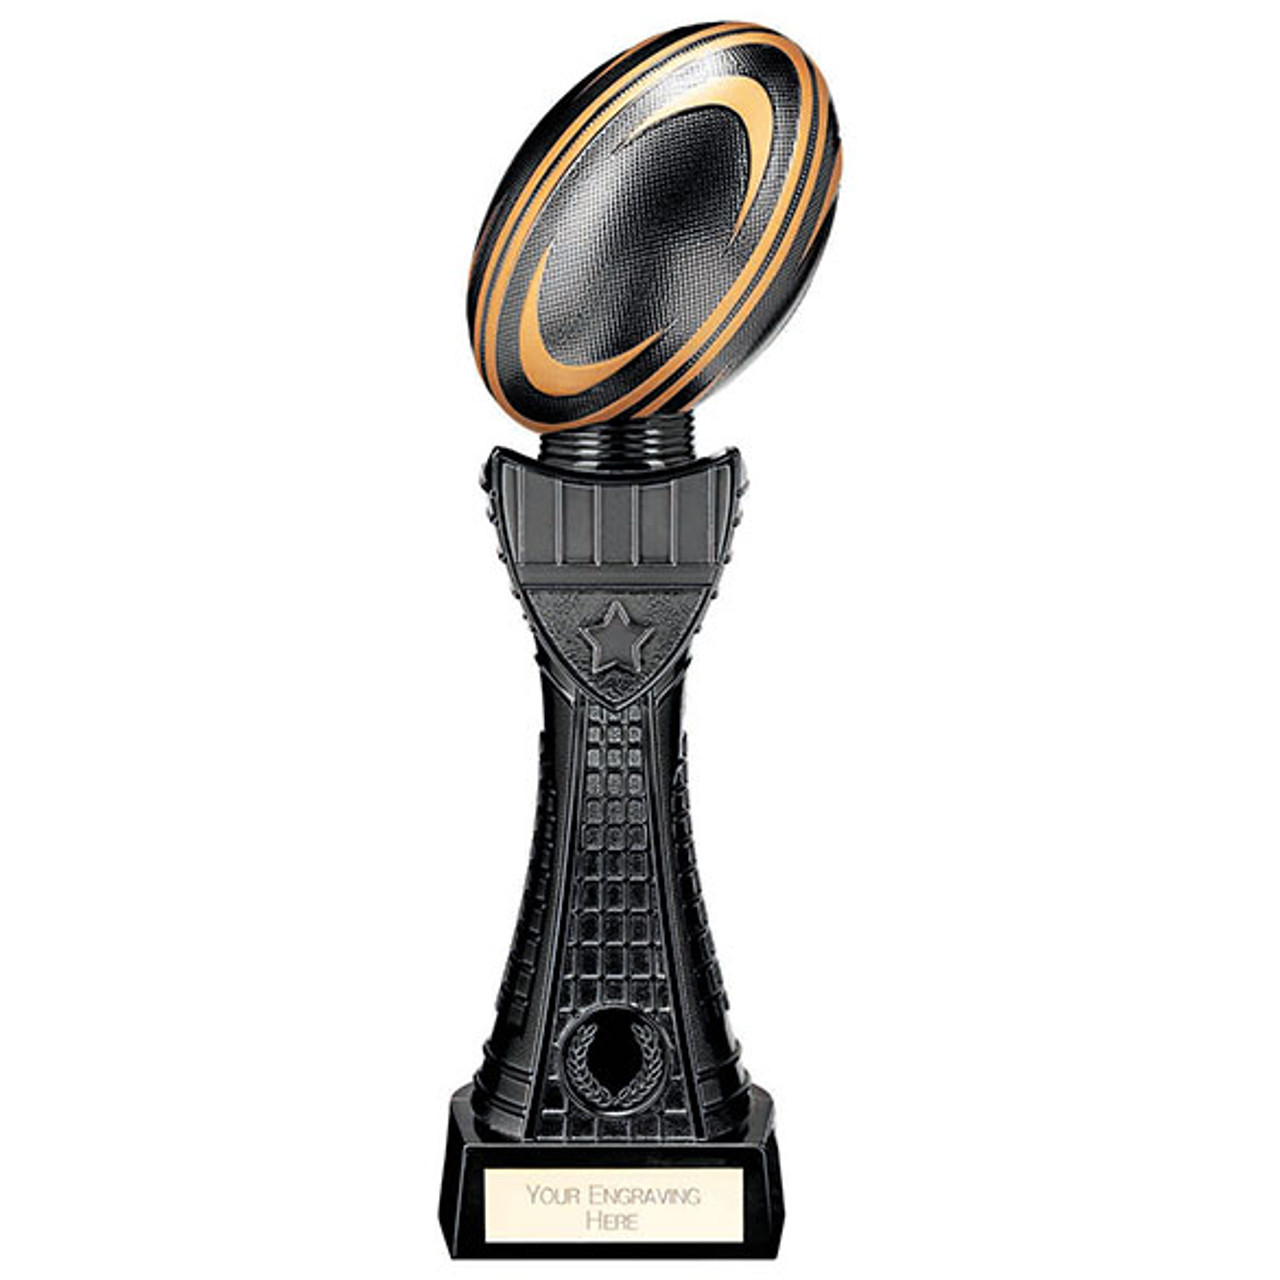 BLACK VIPER TOWER Rugby Ball Trophy